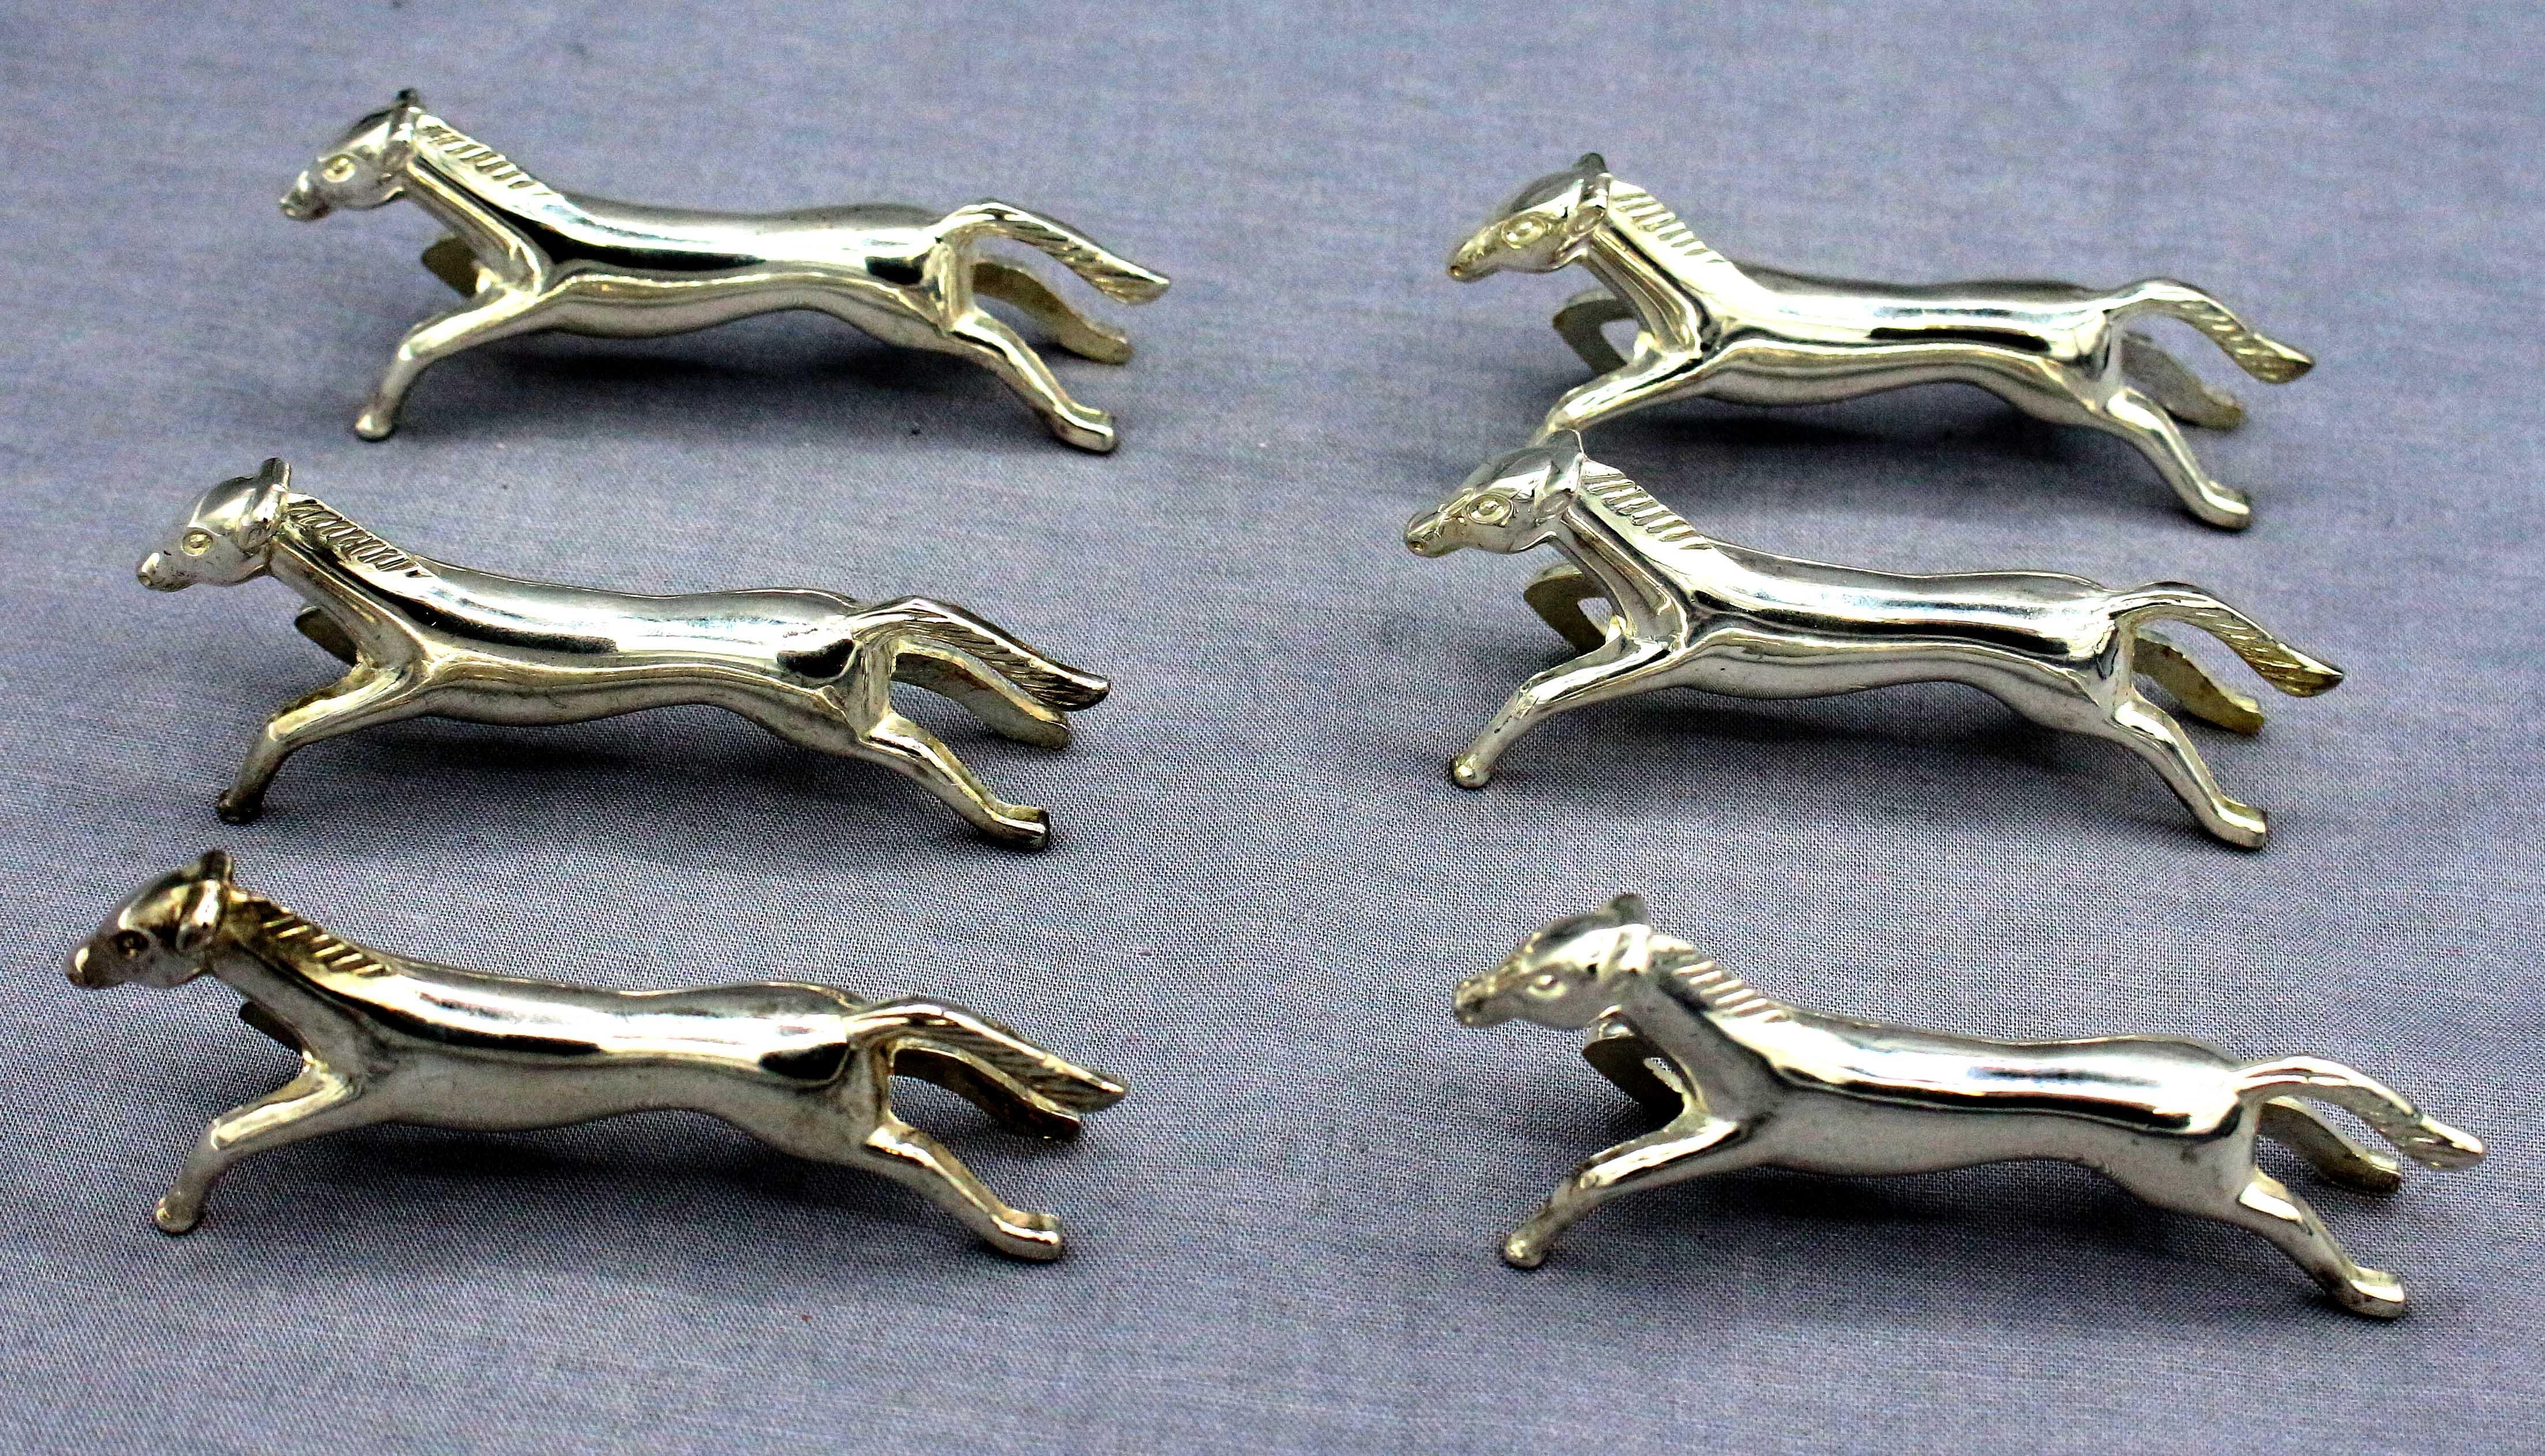 Circa 1970s set of 6 running horse knife rests, probably French. Silver plated. Art deco design. Well modelled.
3